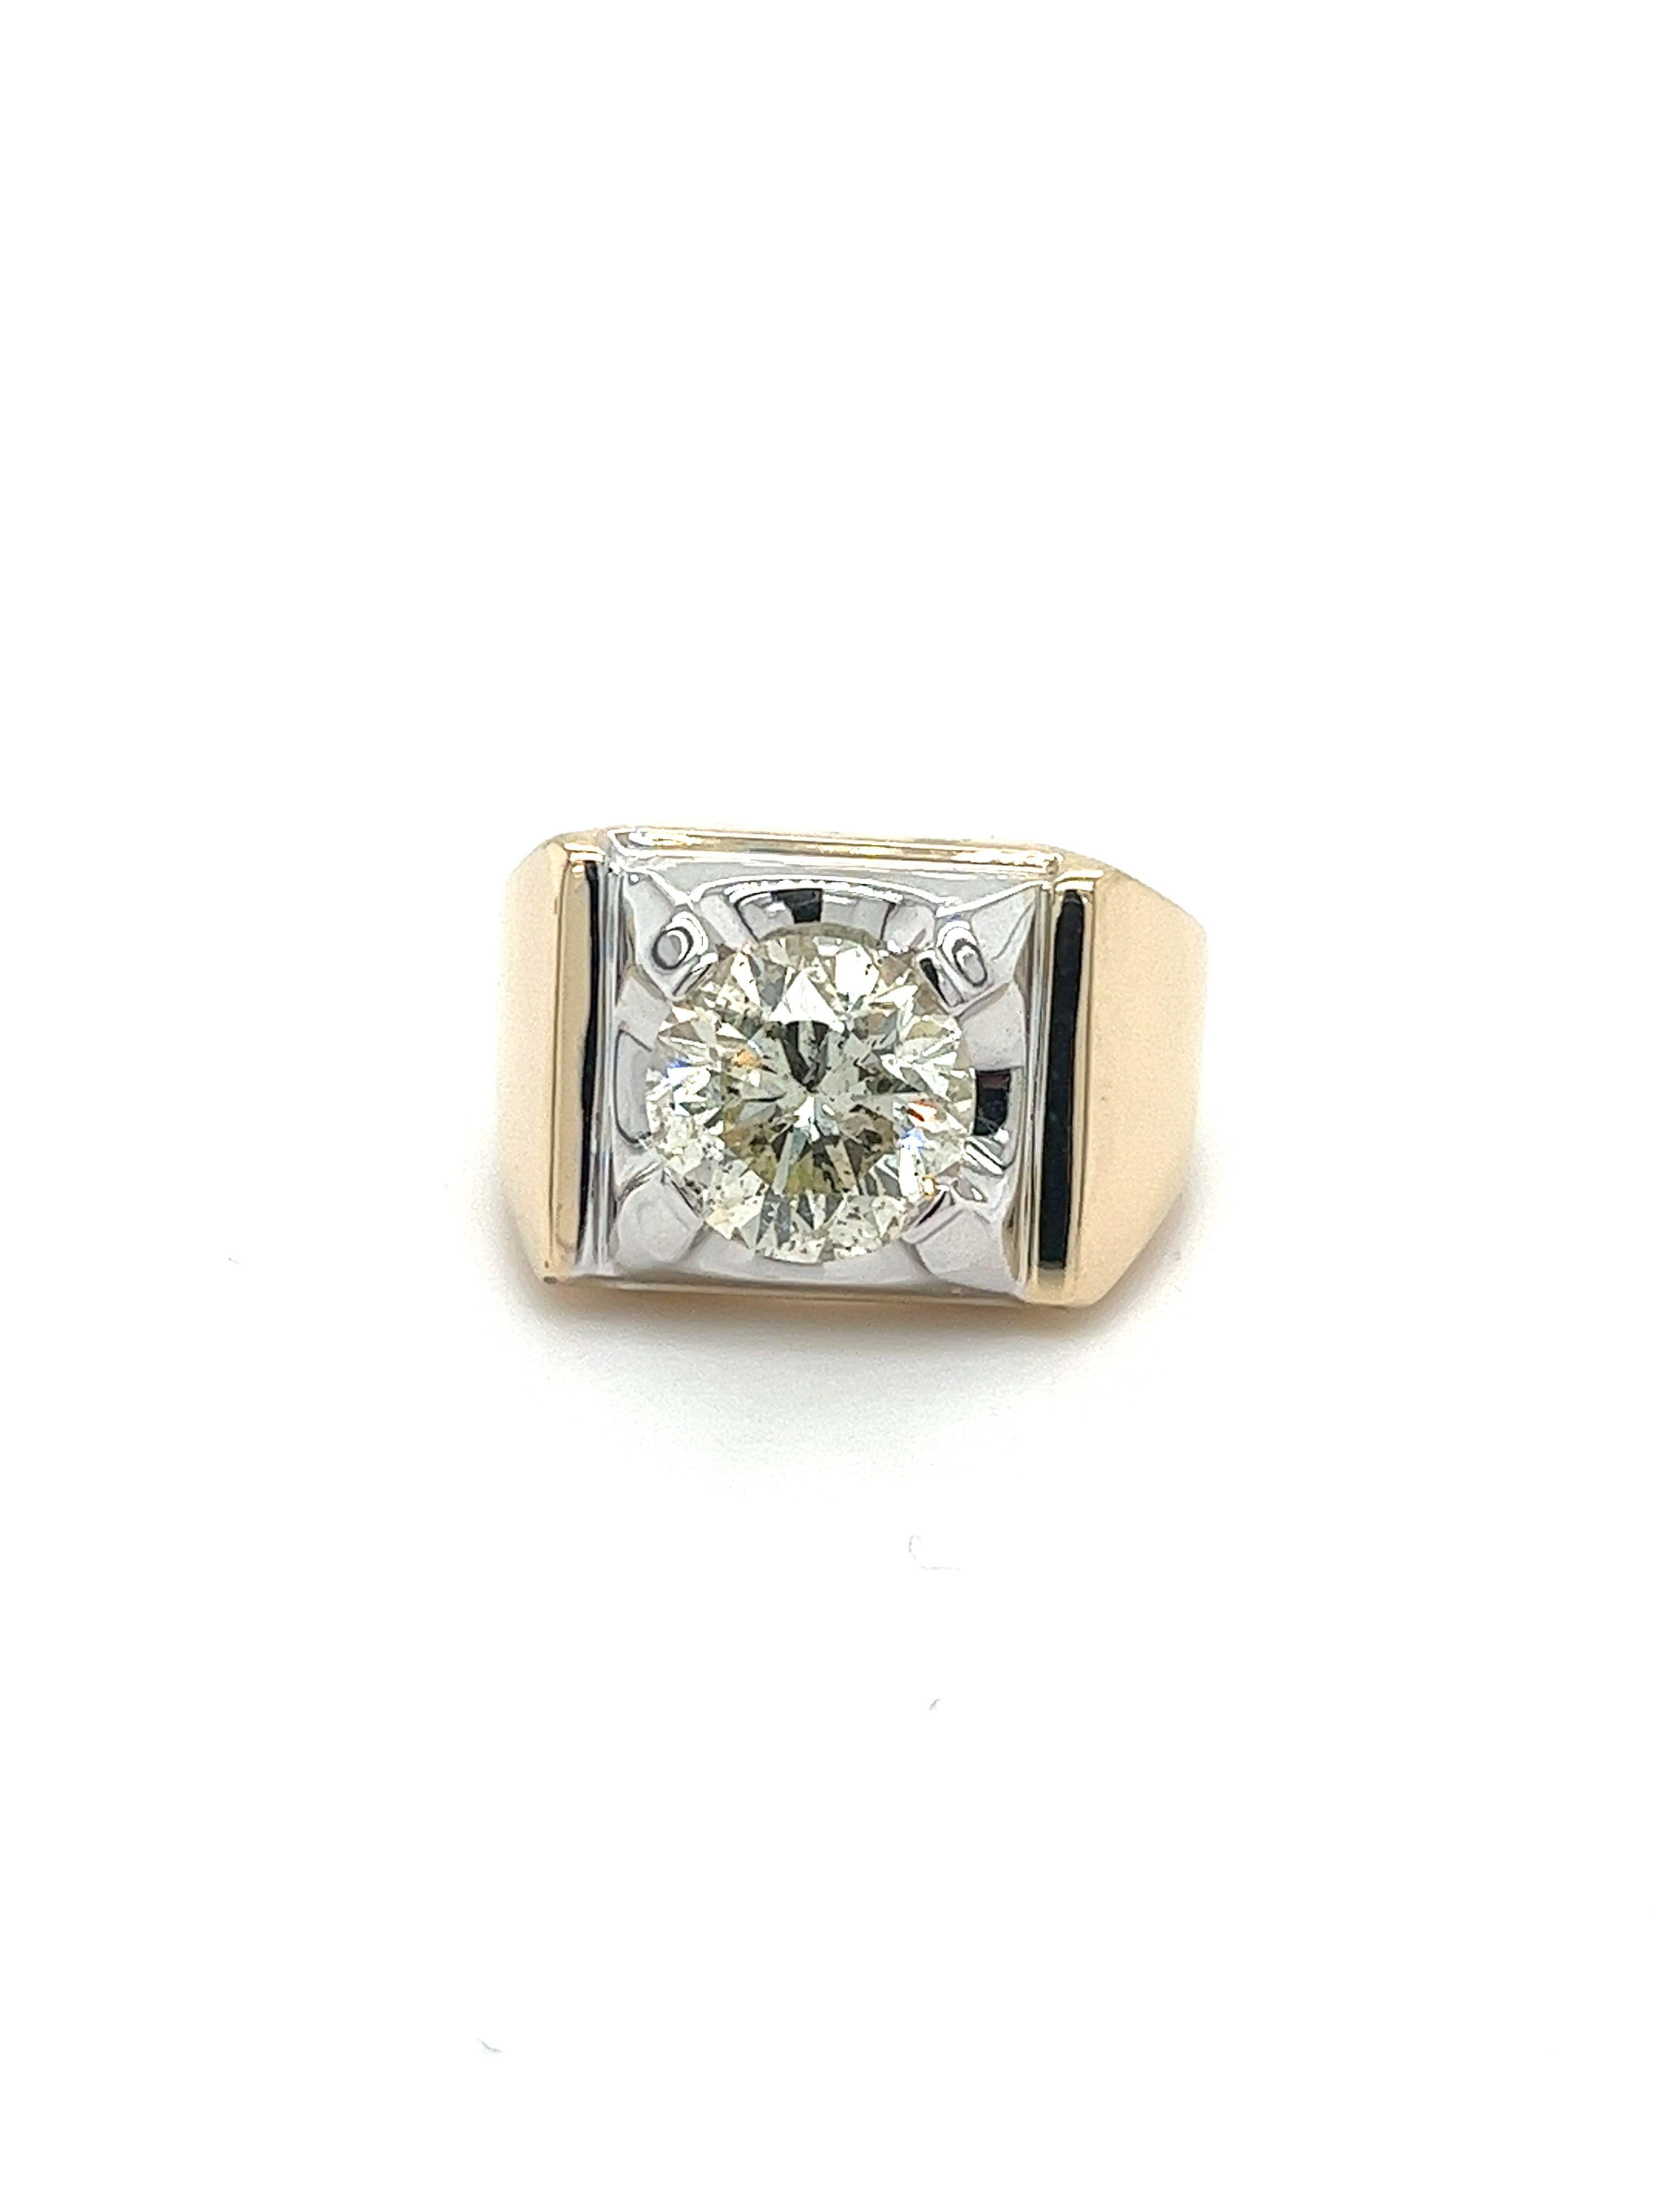 3 Carat Round Cut Natural Diamond Solitaire Mens Ring in 14K Gold Two Tone In New Condition For Sale In Miami, FL